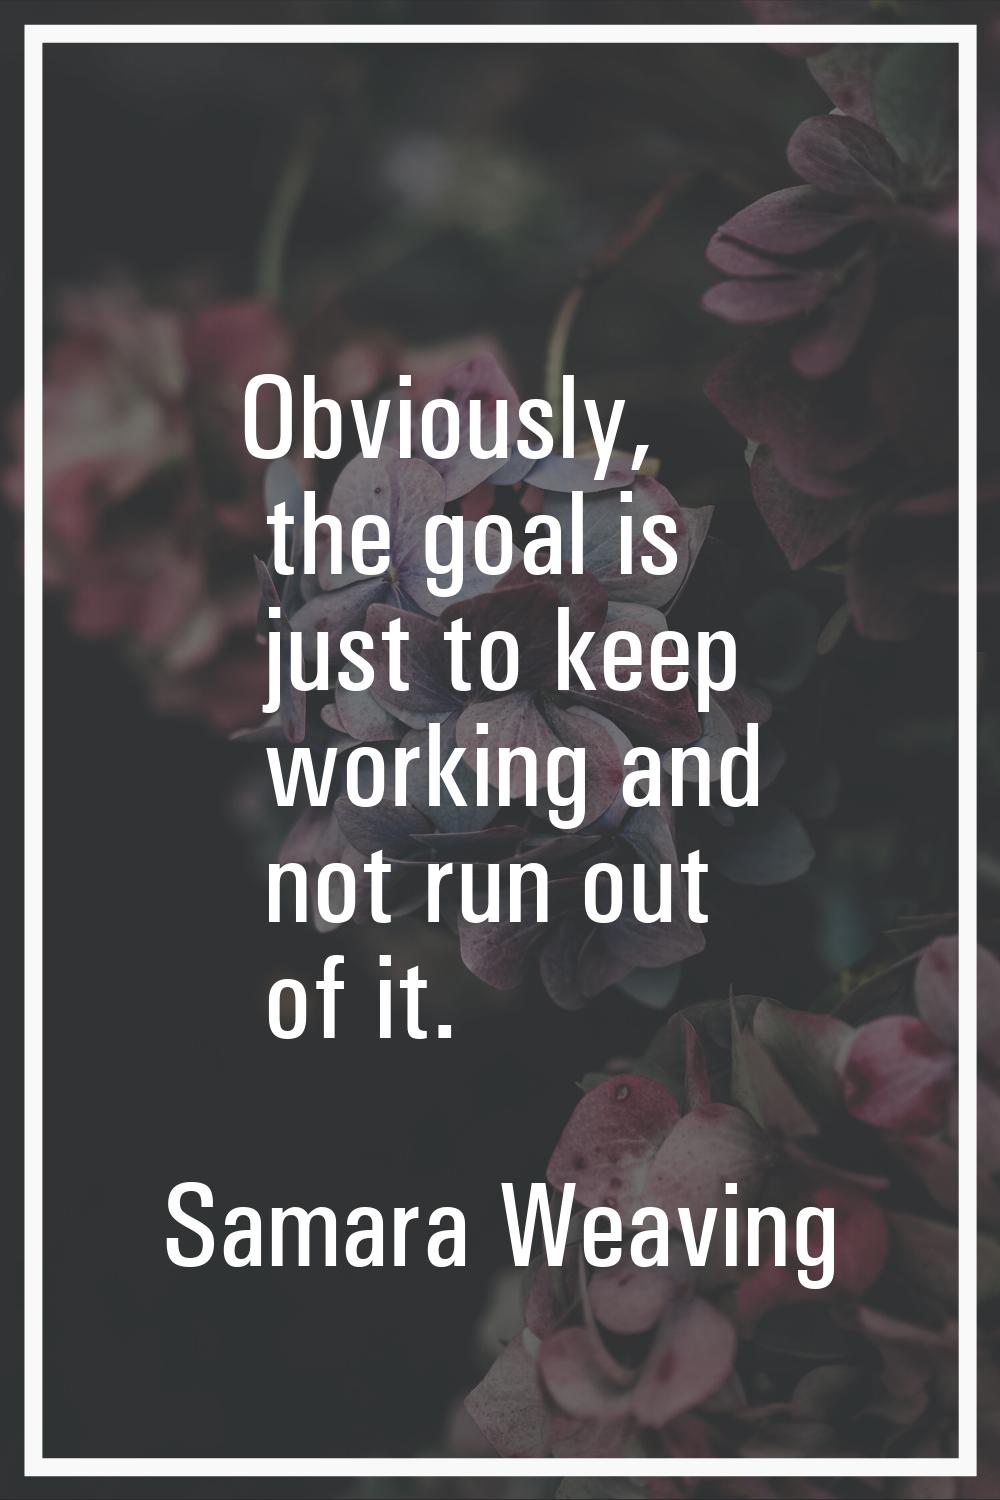 Obviously, the goal is just to keep working and not run out of it.